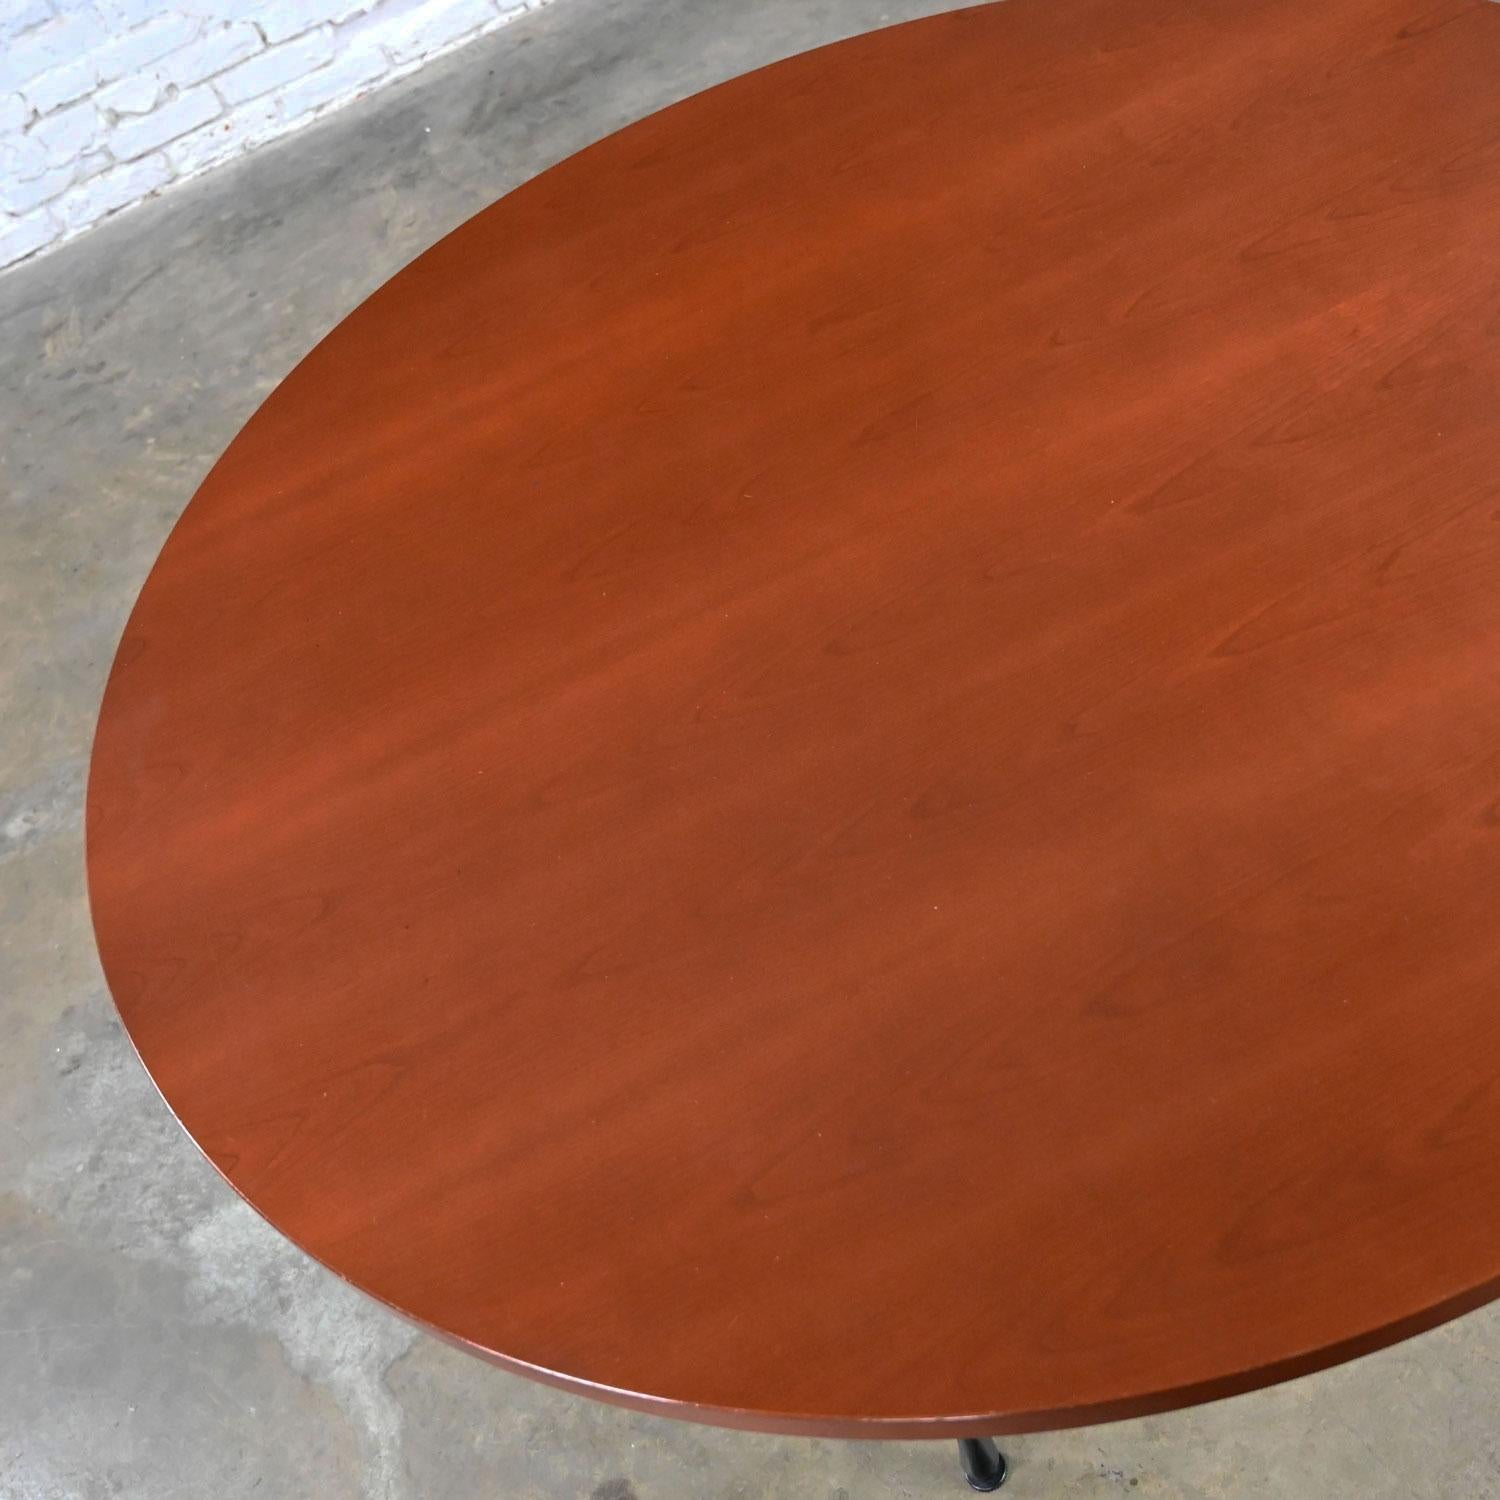 Eames Herman Miller Dark Cherry Round Top Table Universal Pedestal Base In Good Condition For Sale In Topeka, KS